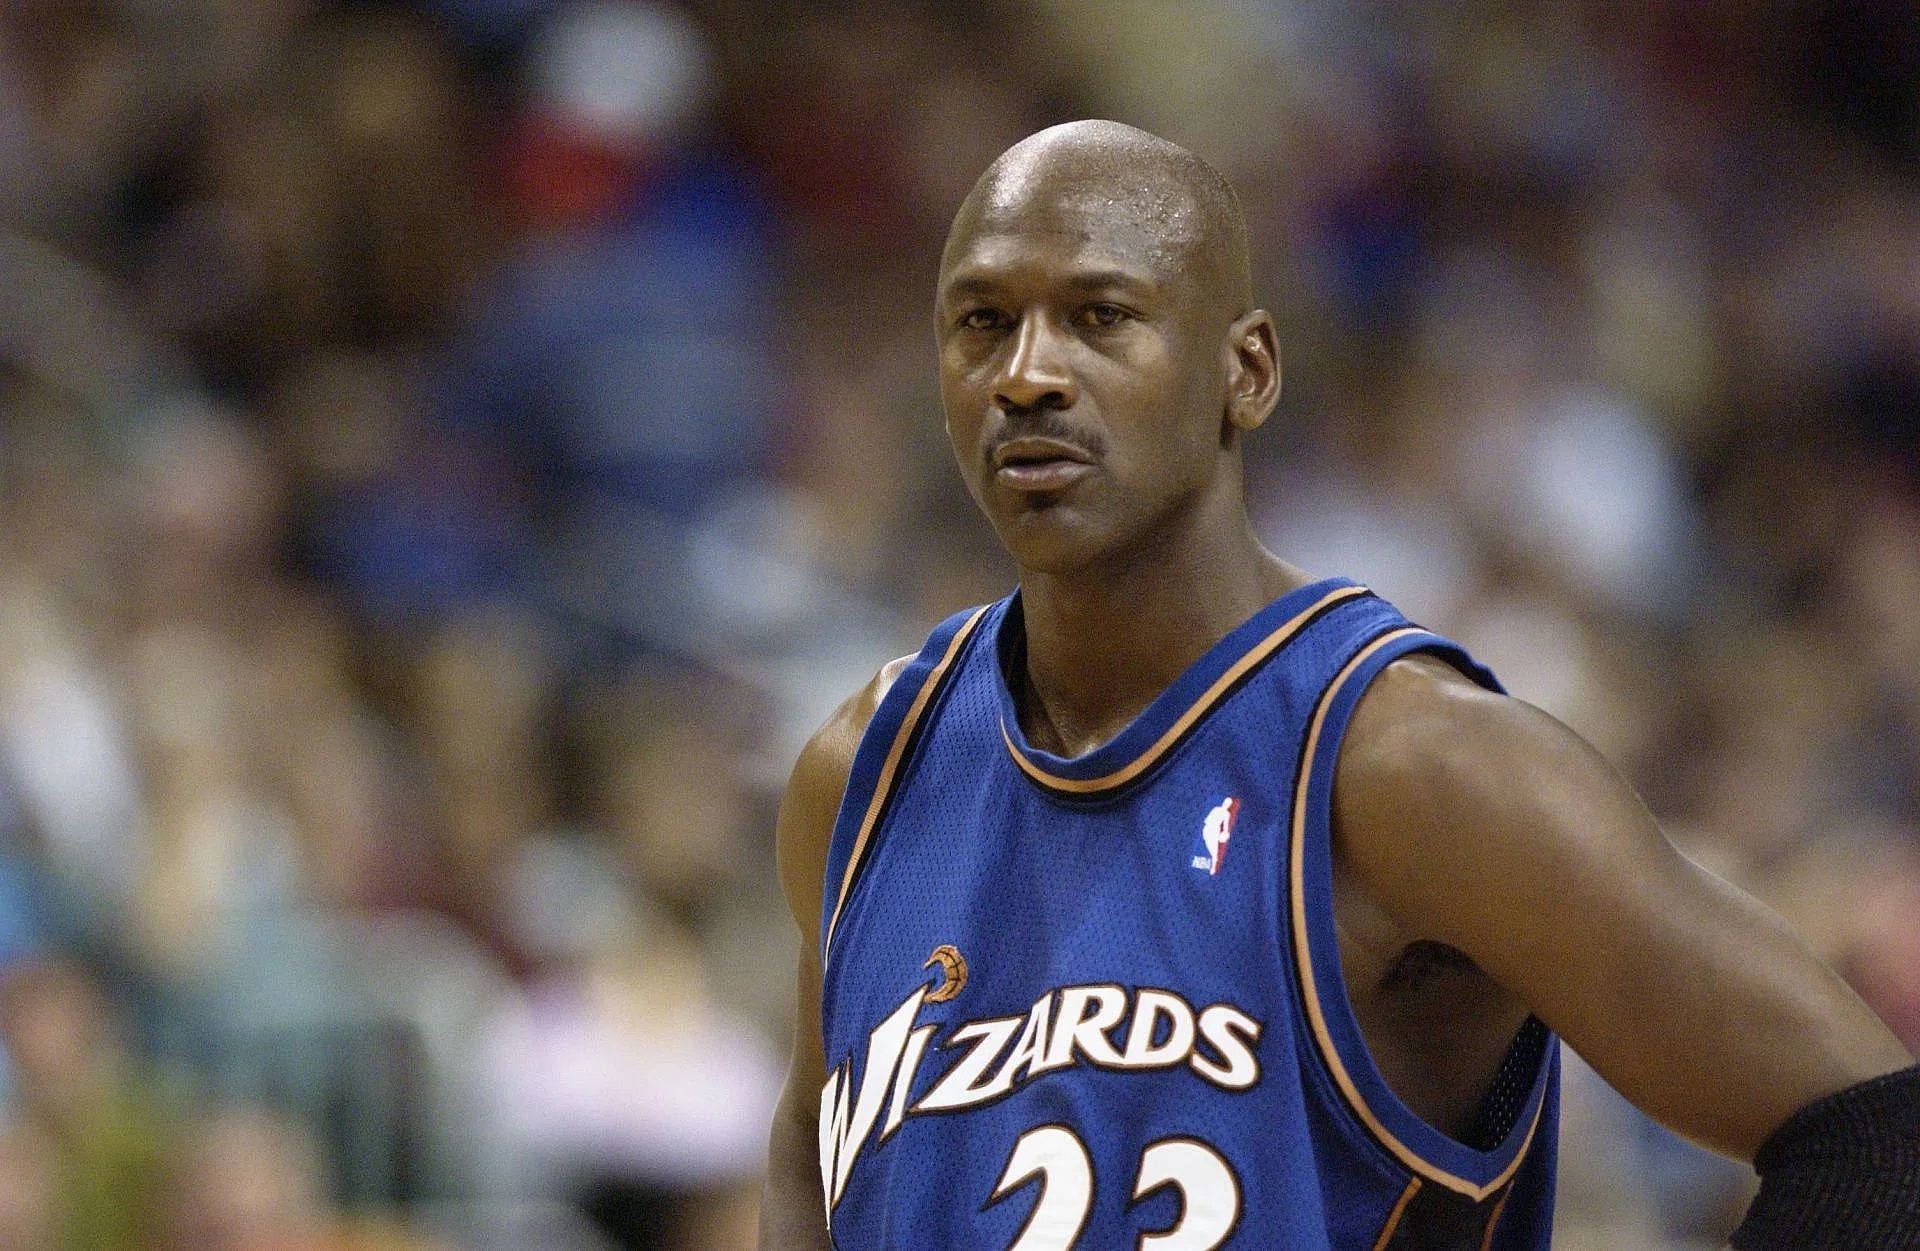 Michael Jordan played his final two seasons in the NBA with the Washington Wizards.